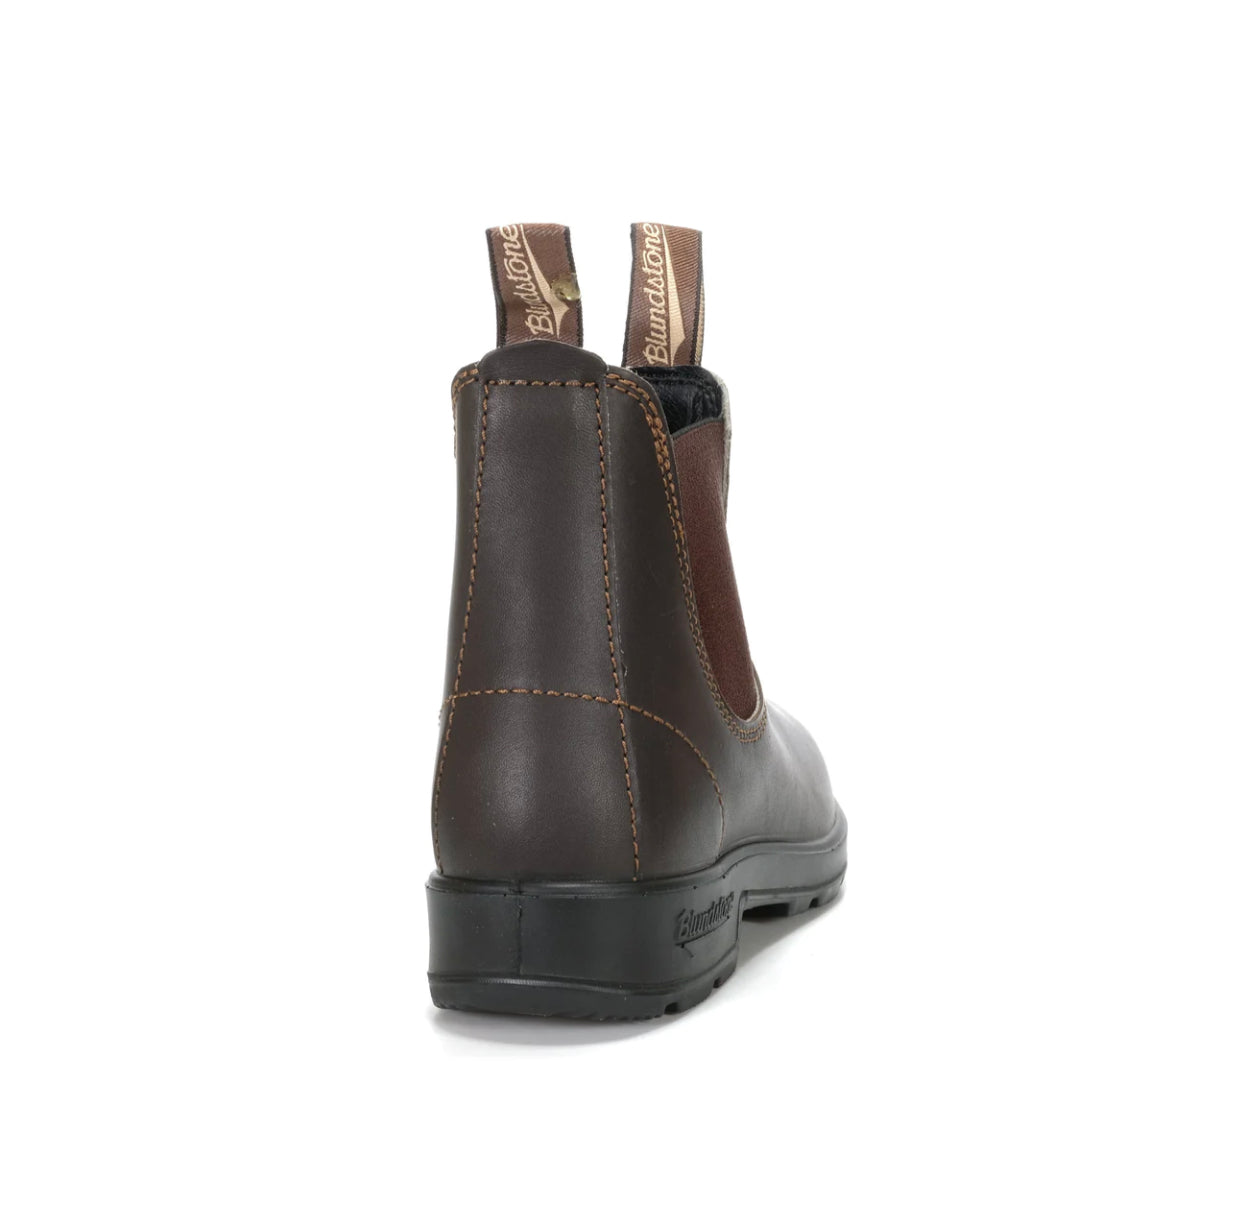 Blundstone 500 Brown Soft Toe Elastic Sided Boot